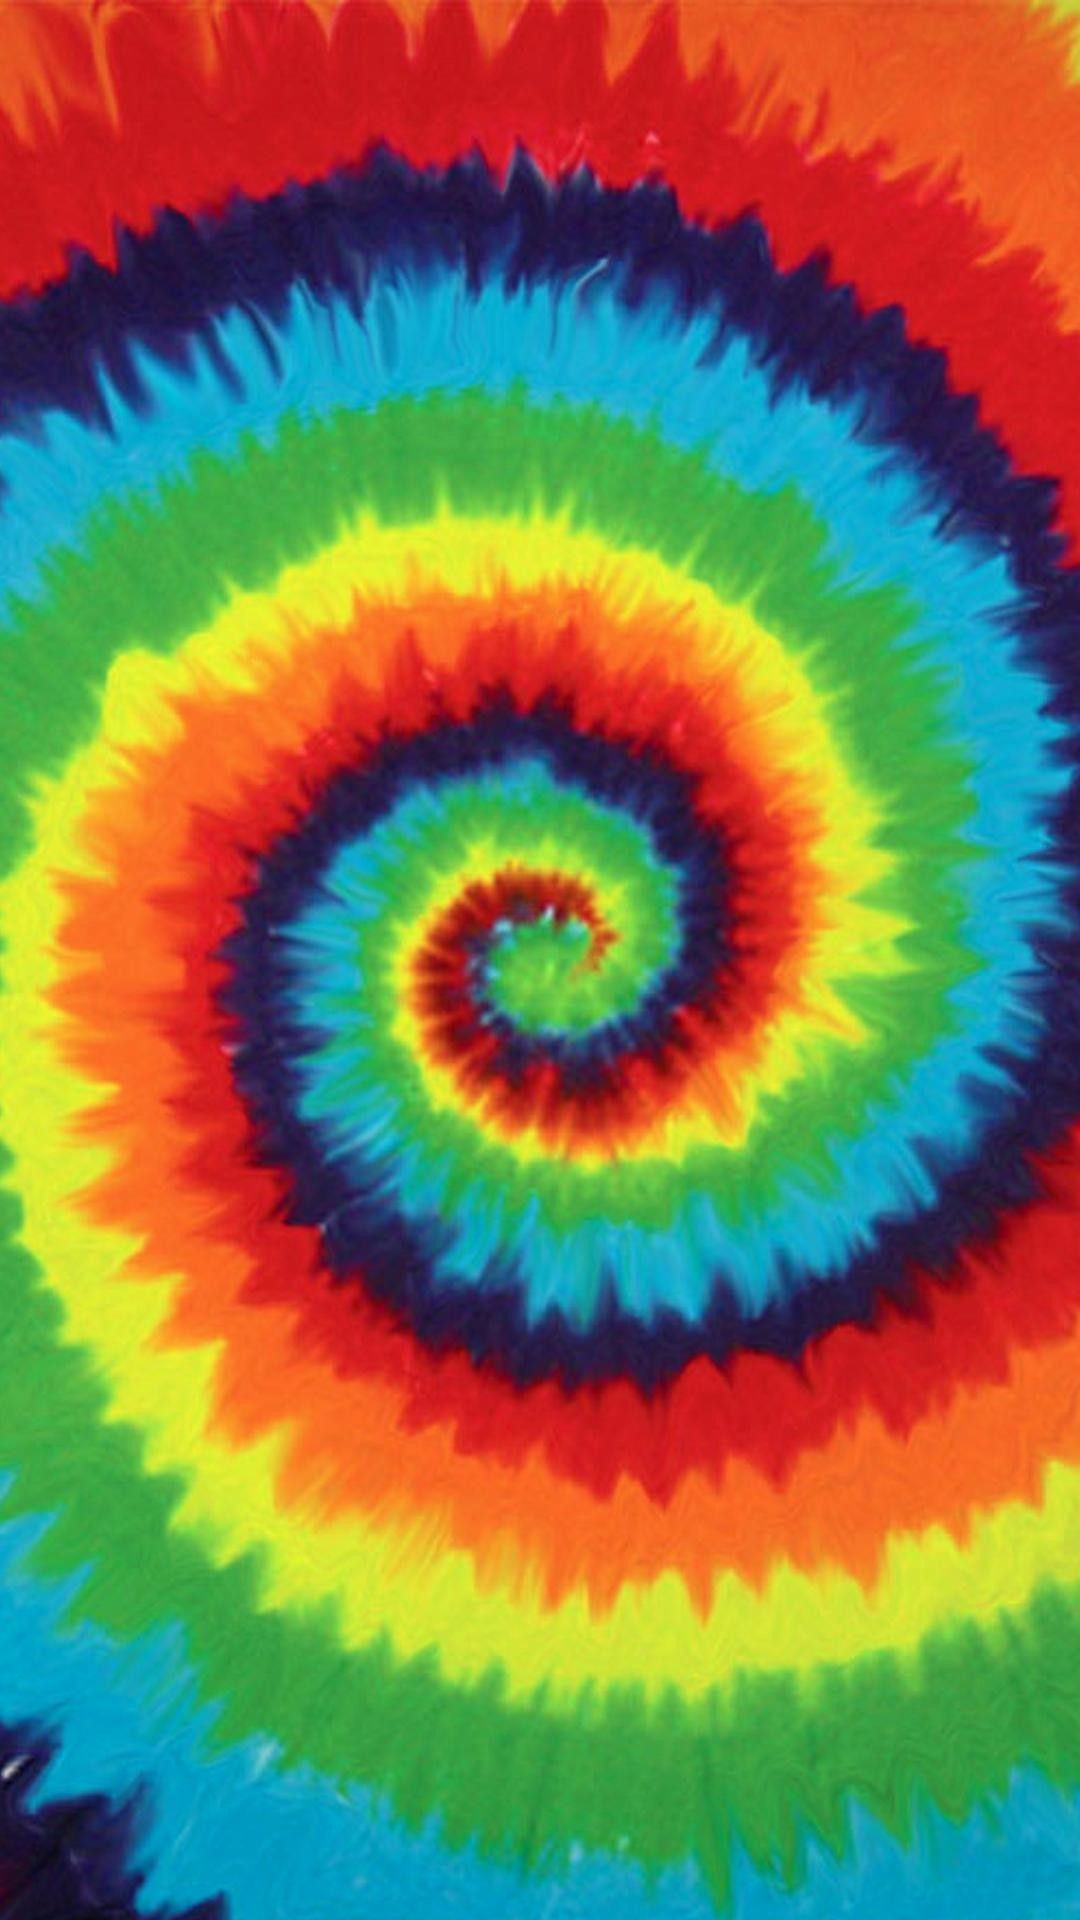 A colorful tie dye pattern on the fabric - Trippy